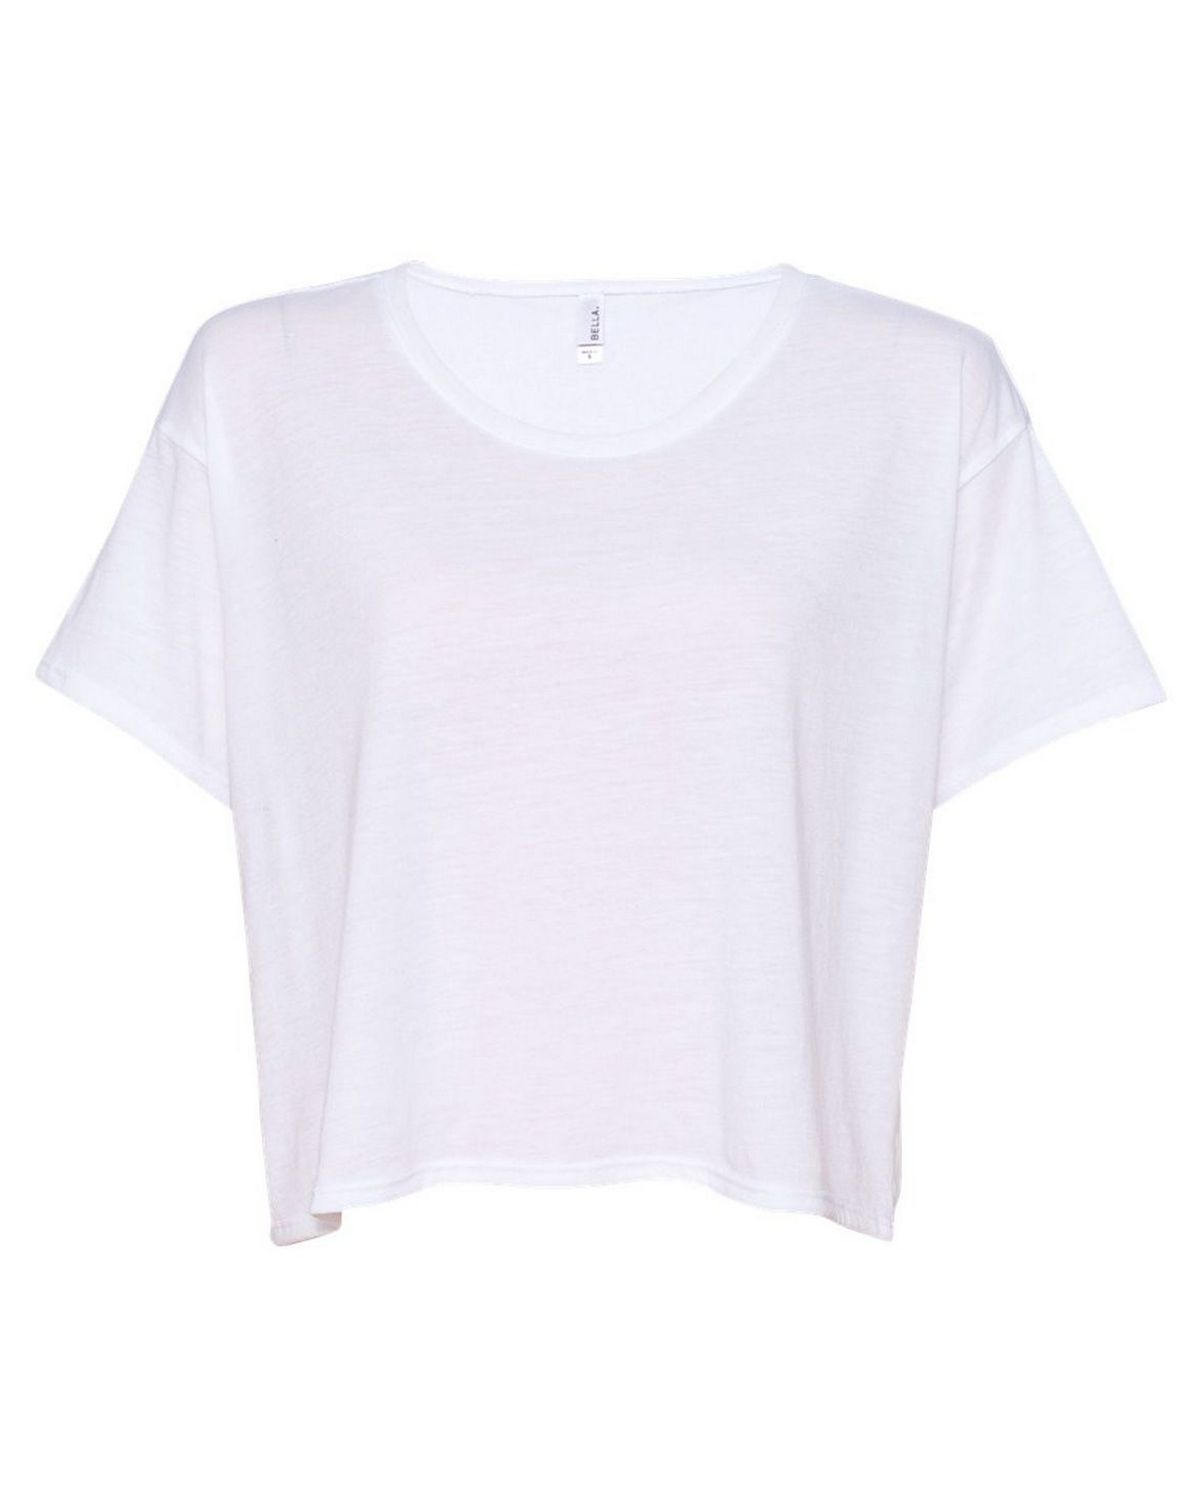 Bella + Canvas 8881 Womens Flowy Boxy Tee - Free Shipping Available